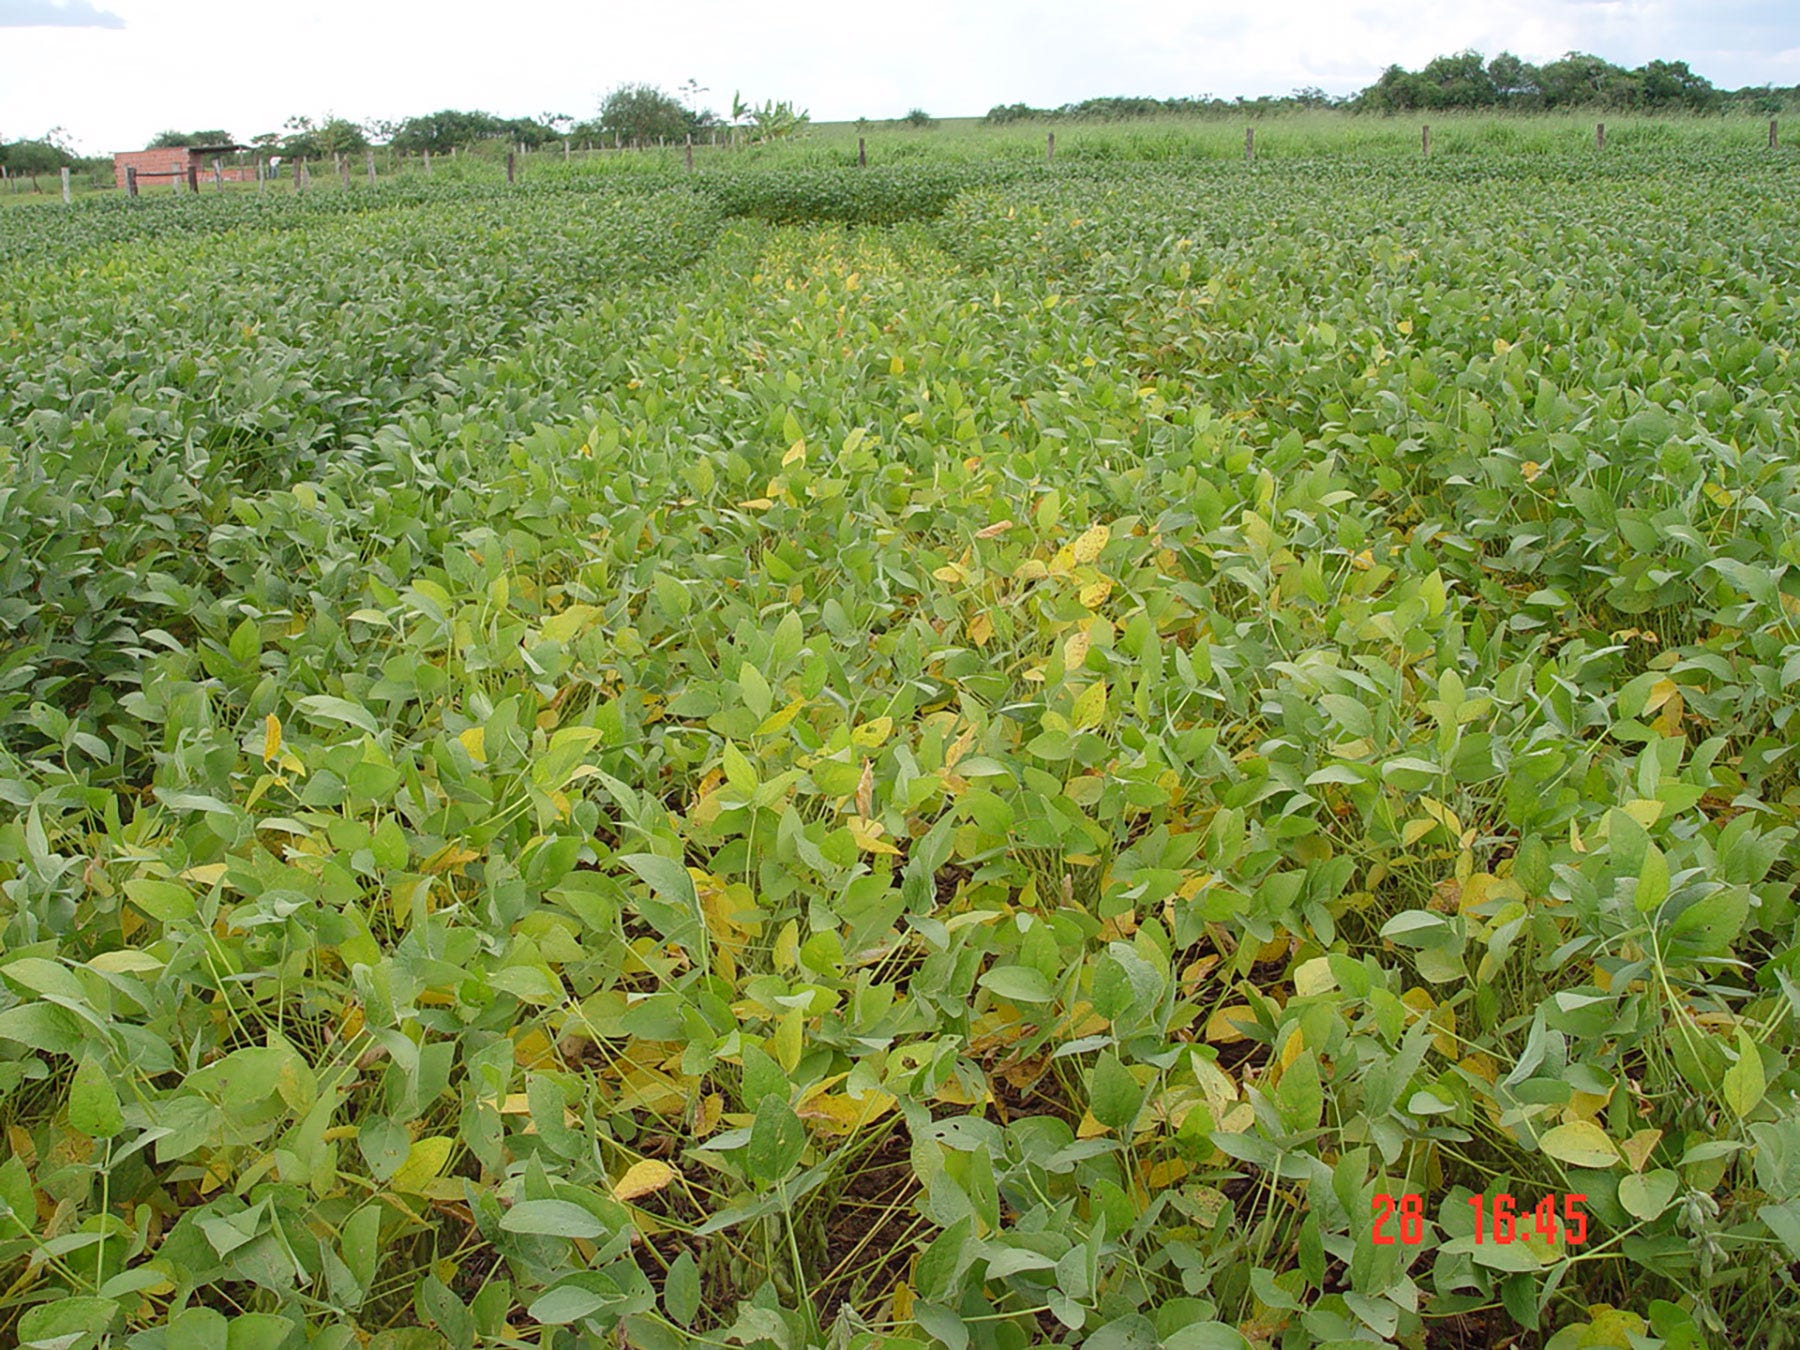 soybean field with plants showing classic symptoms of sulfur deficiency